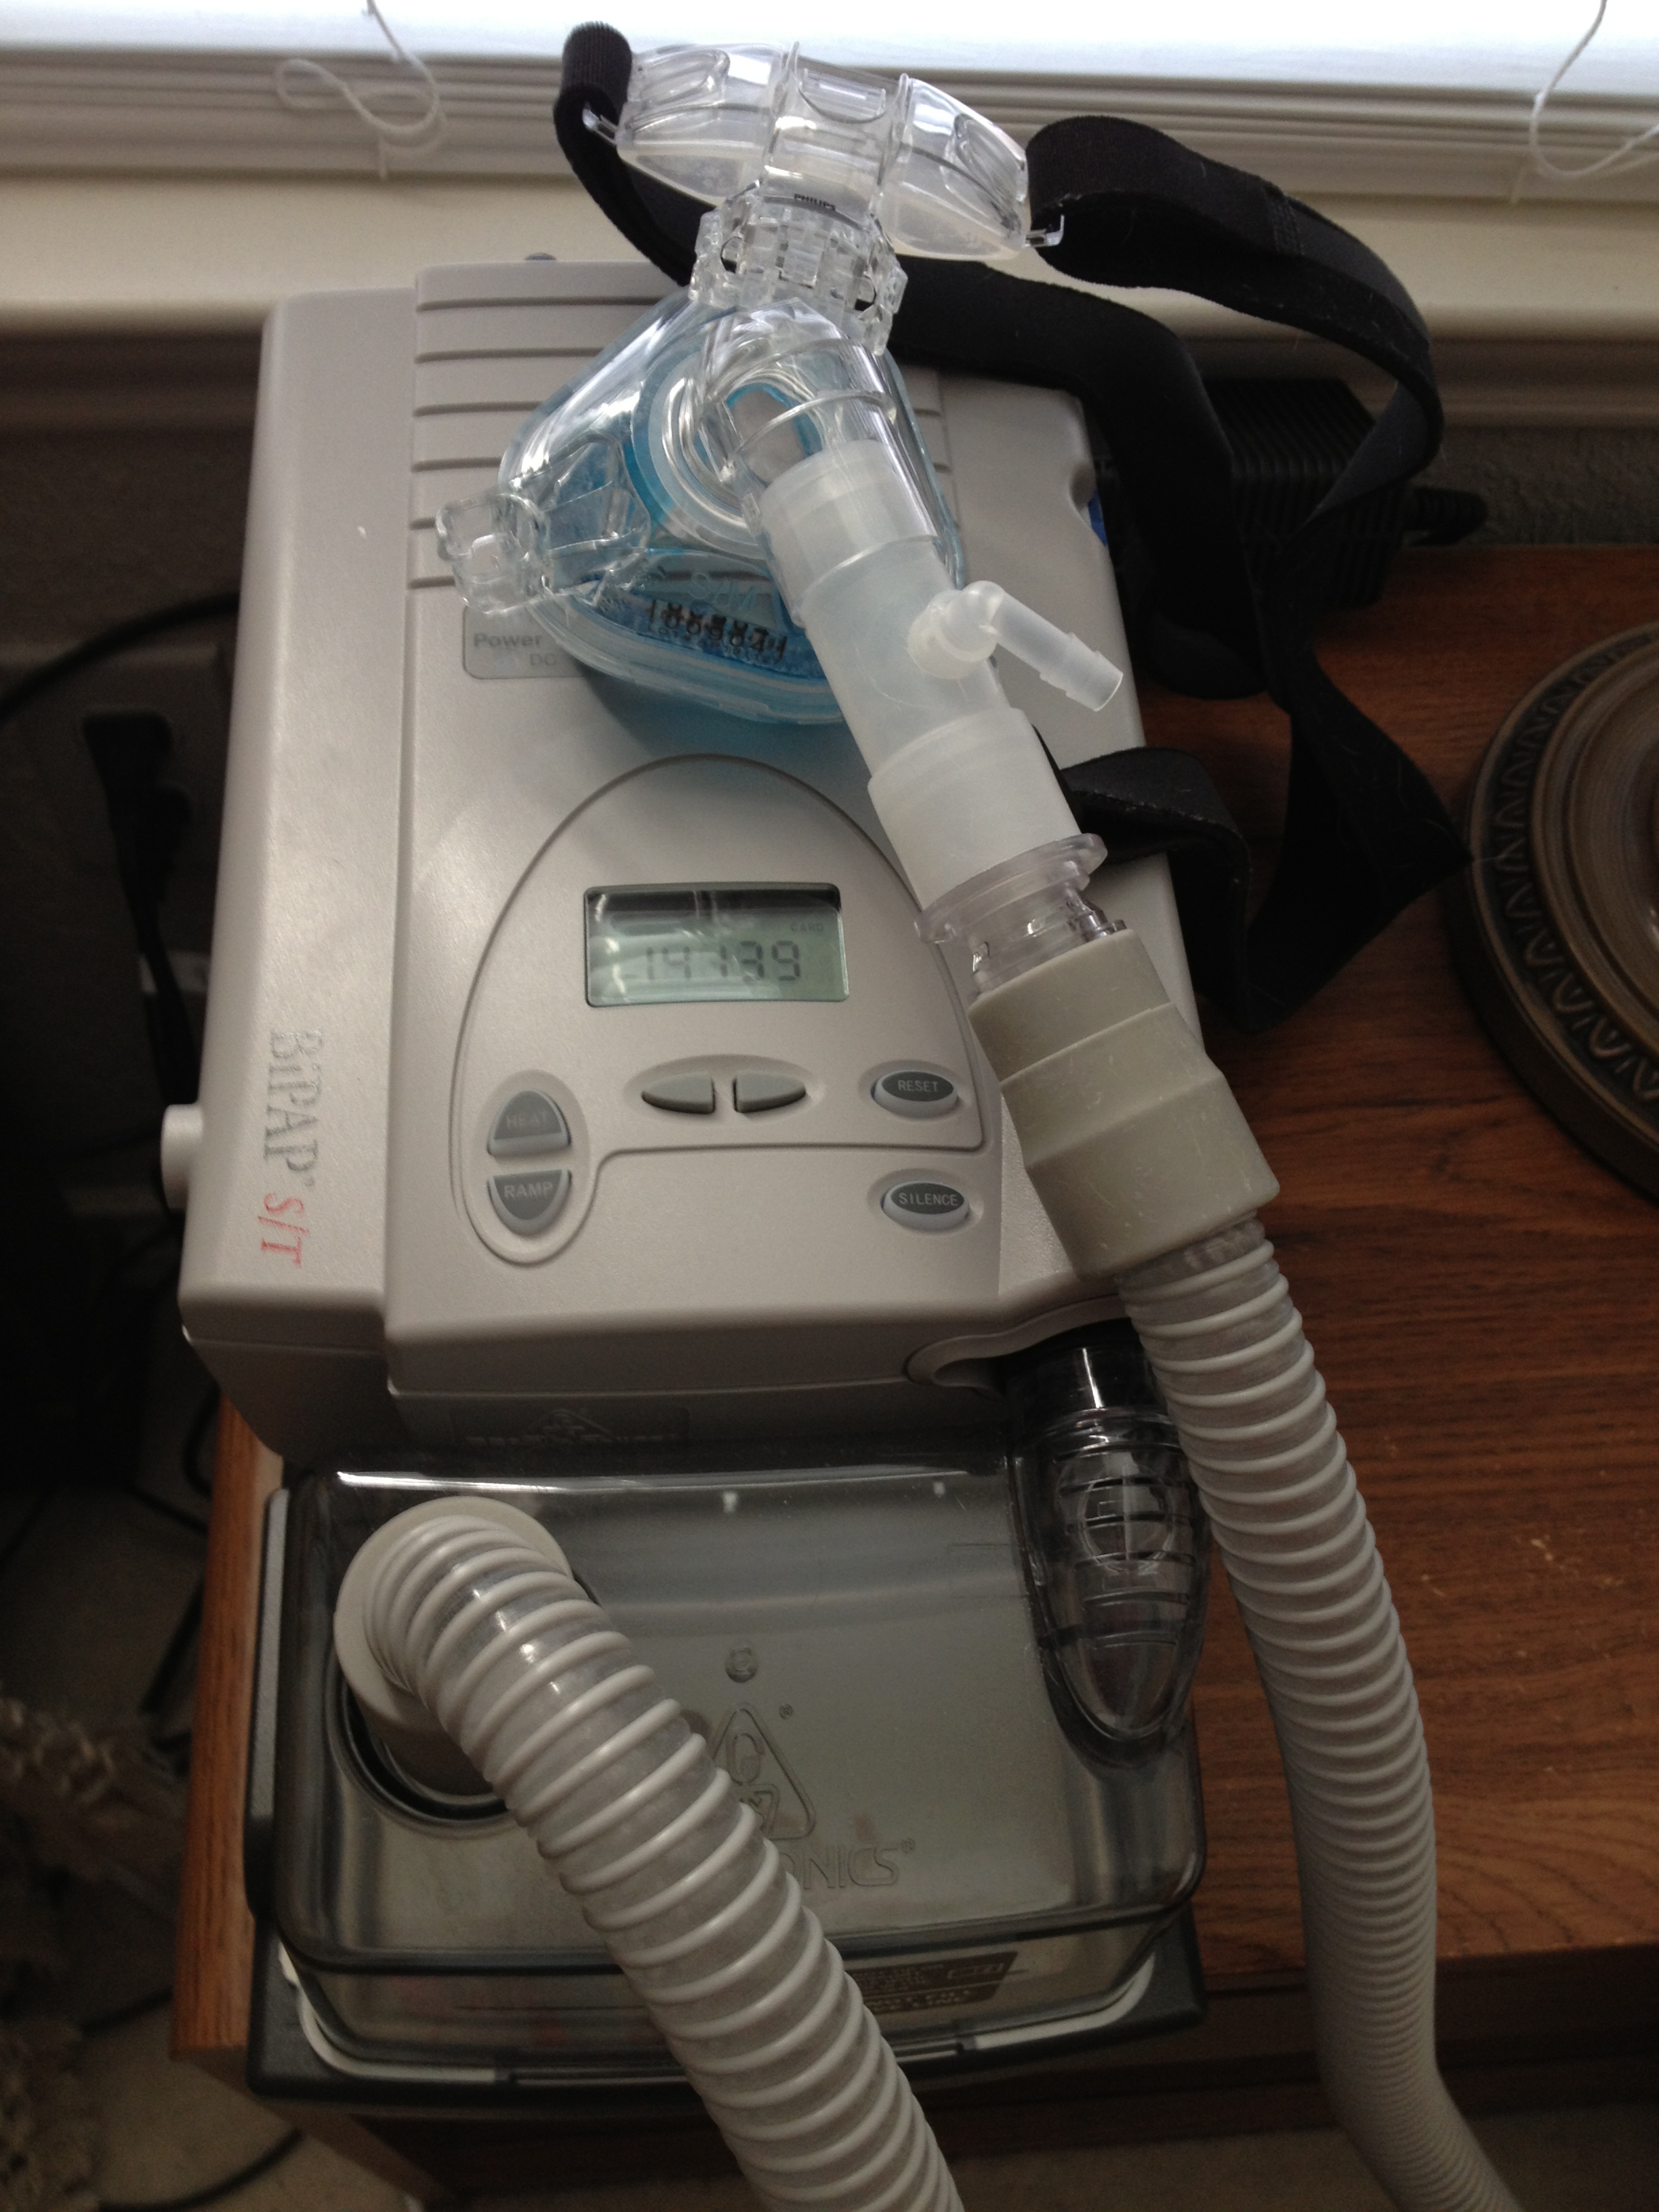 My experience with the Bipap machine… | Living On O2 for Life